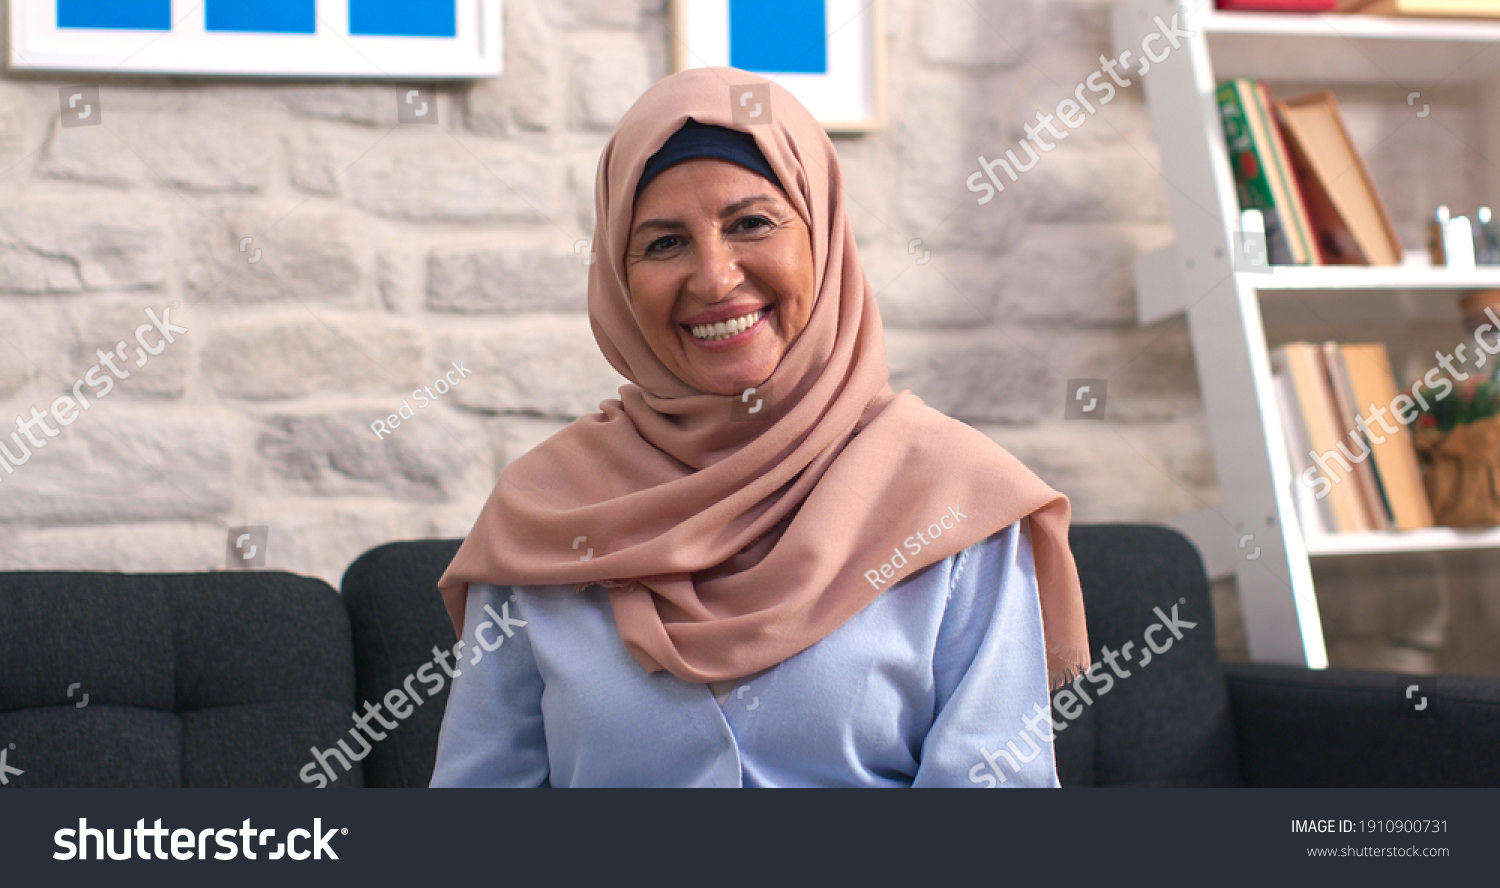 Beautiful face portrait of happy mature middle-aged woman in hijab. Old lady in turban looking at camera with healthy cheerful smile.  #1910900731